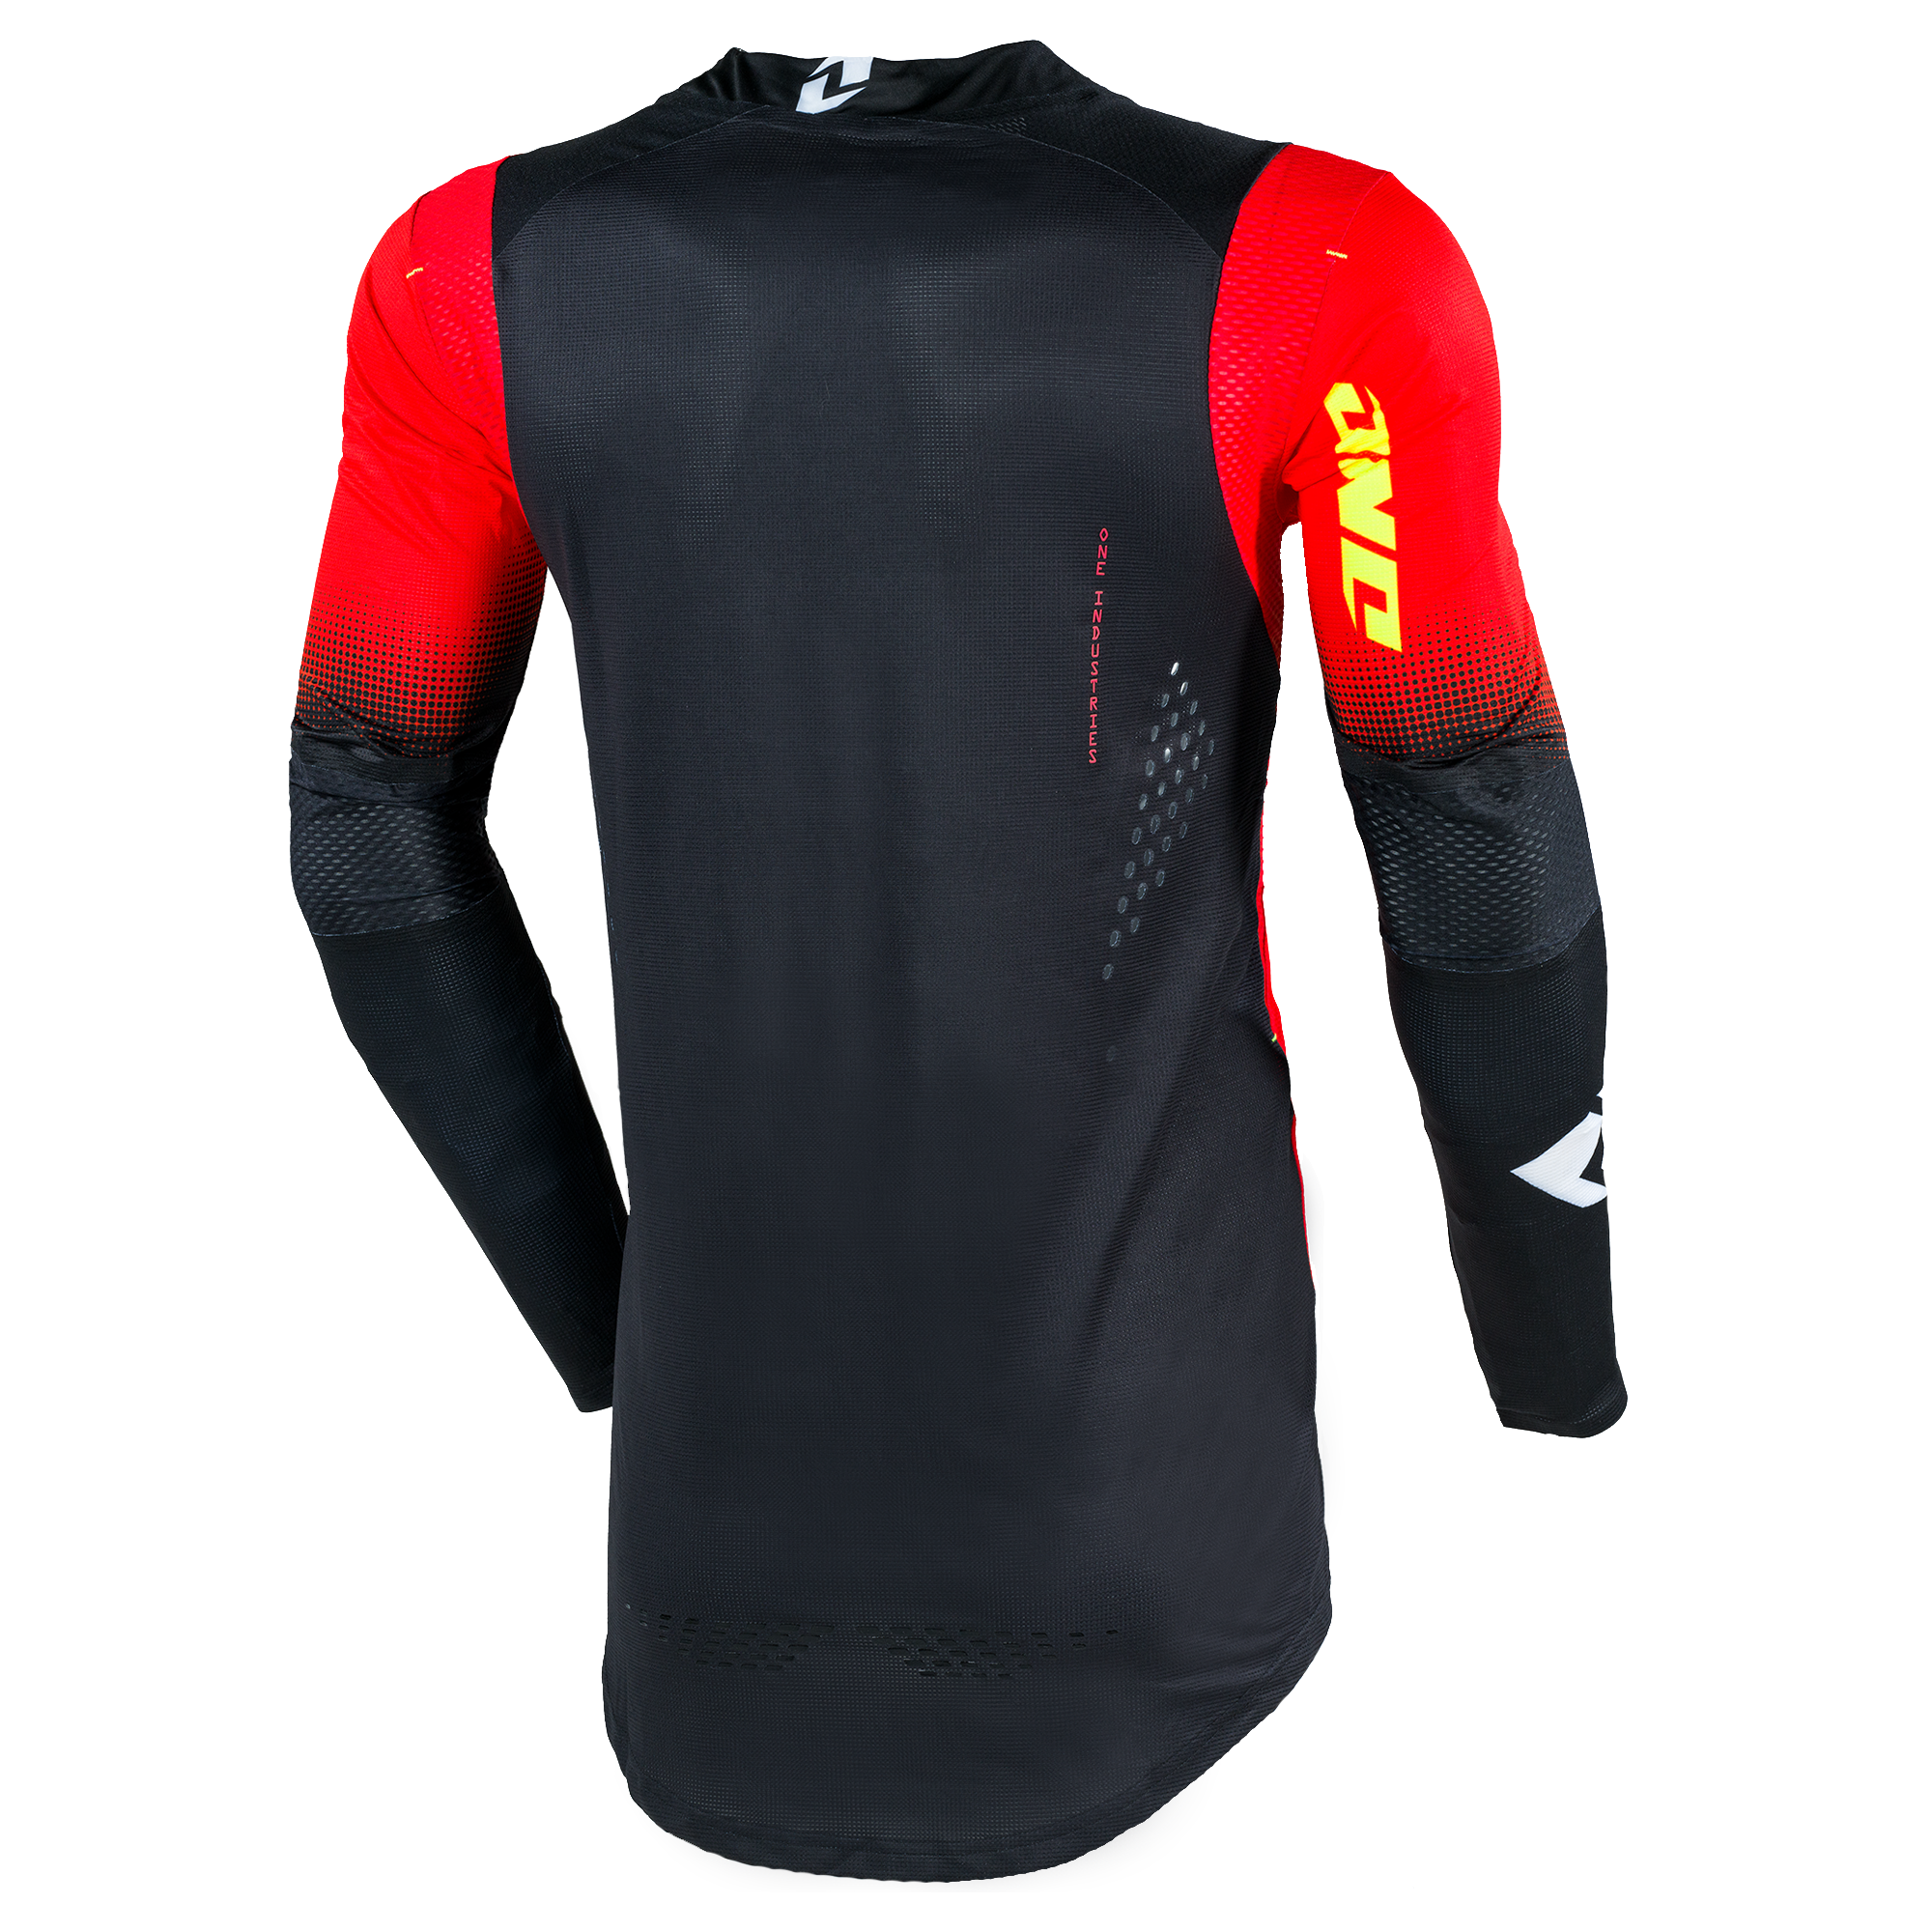 X-197 Jersey - SCORCH RED